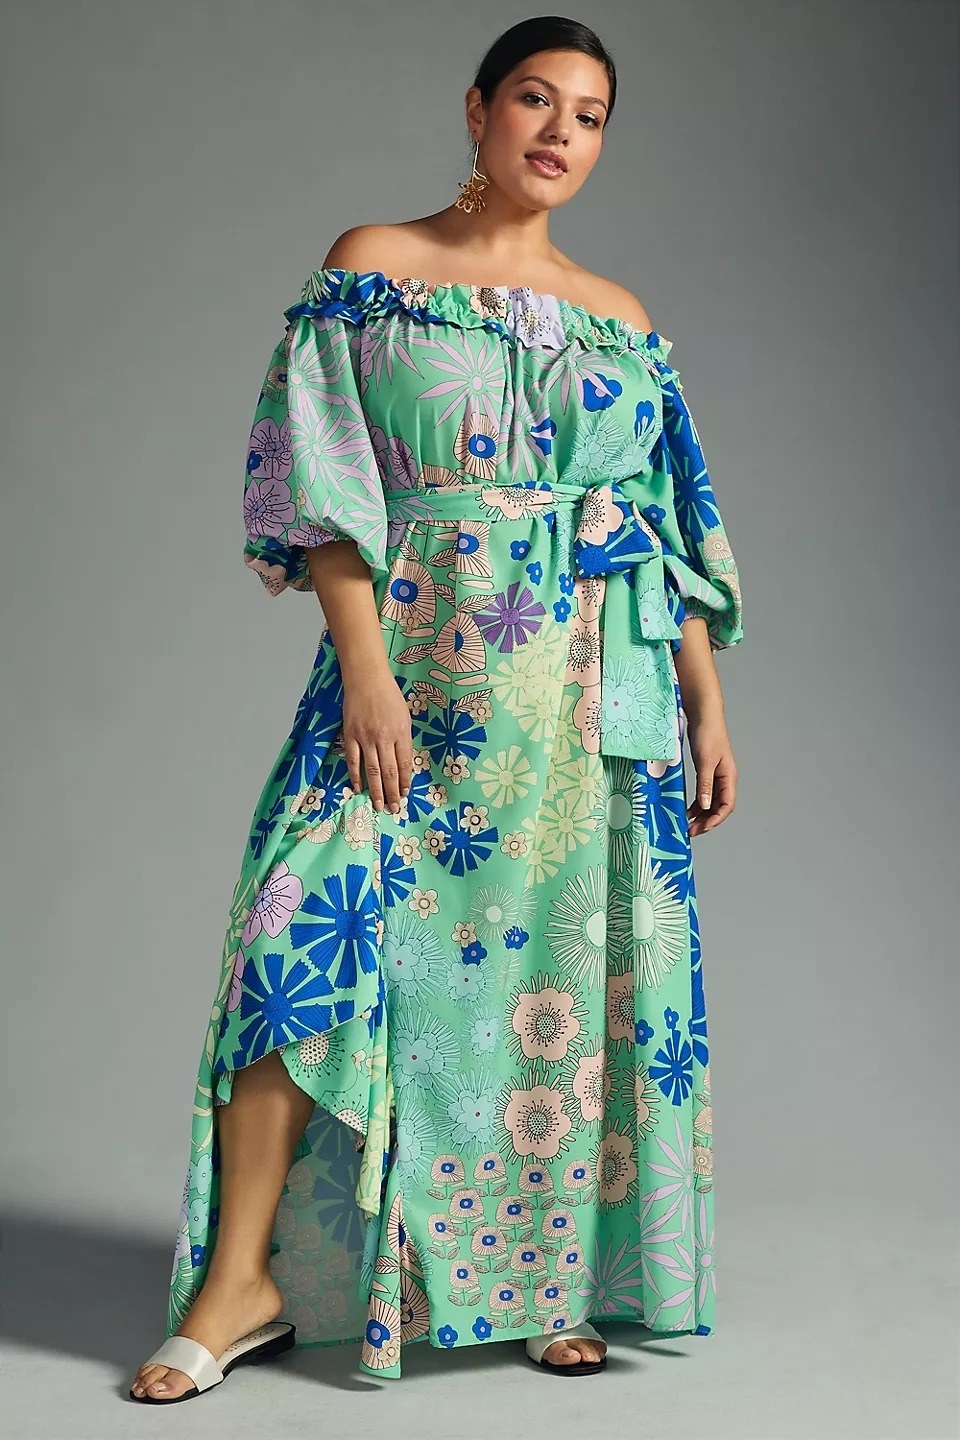 model wearing green and blue printed off-the-shoulder dress